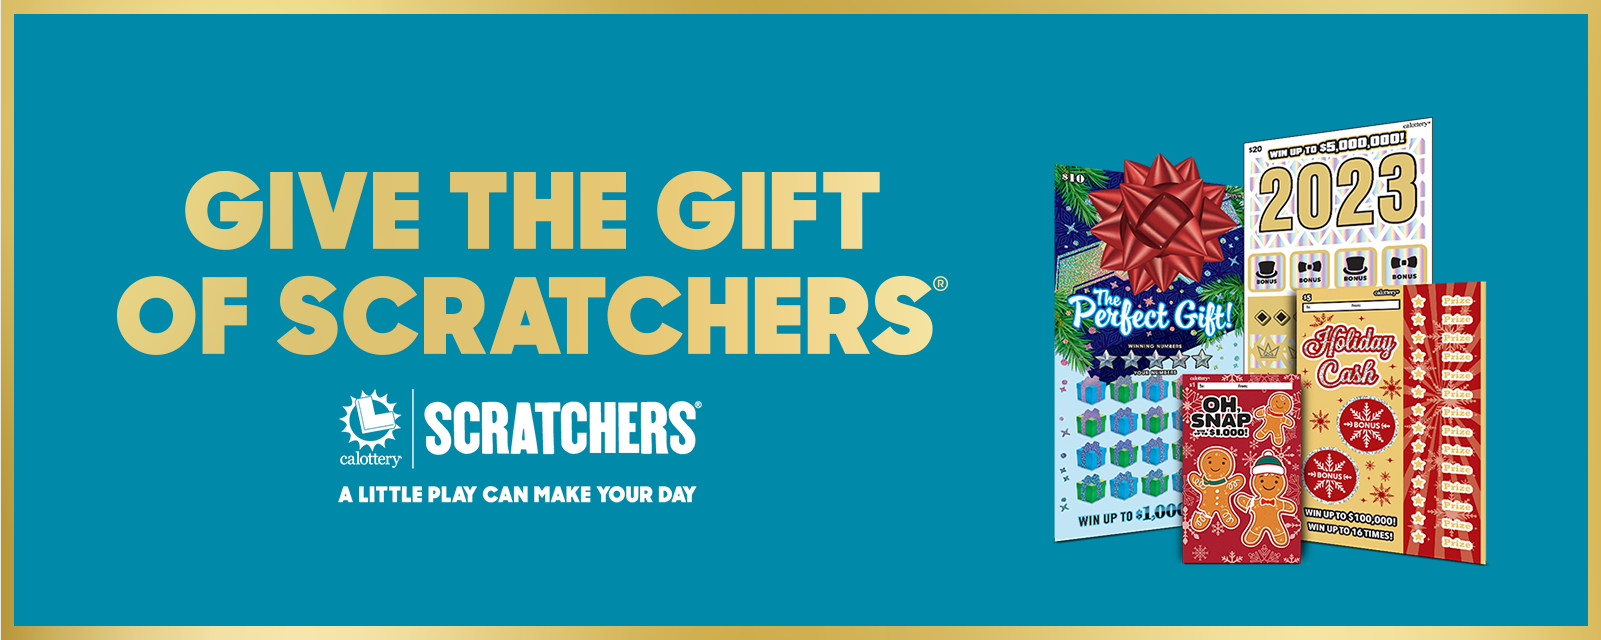 Give The Gift Of Scratchers